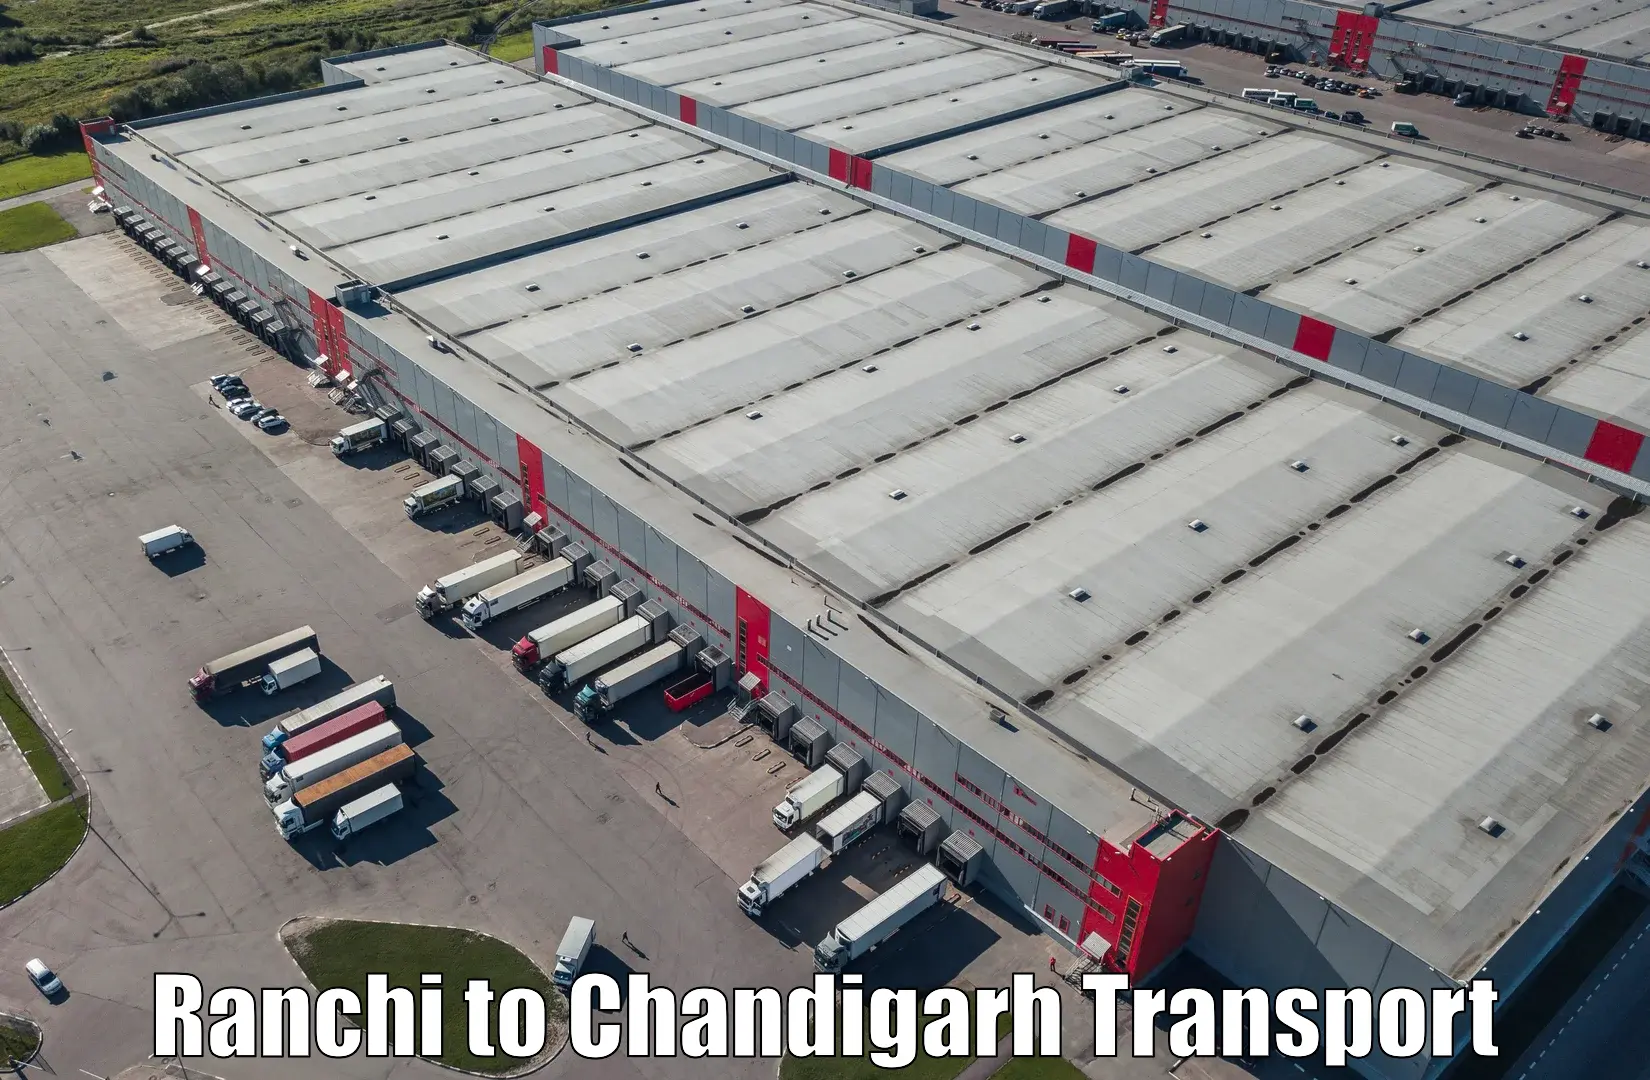 Delivery service Ranchi to Chandigarh